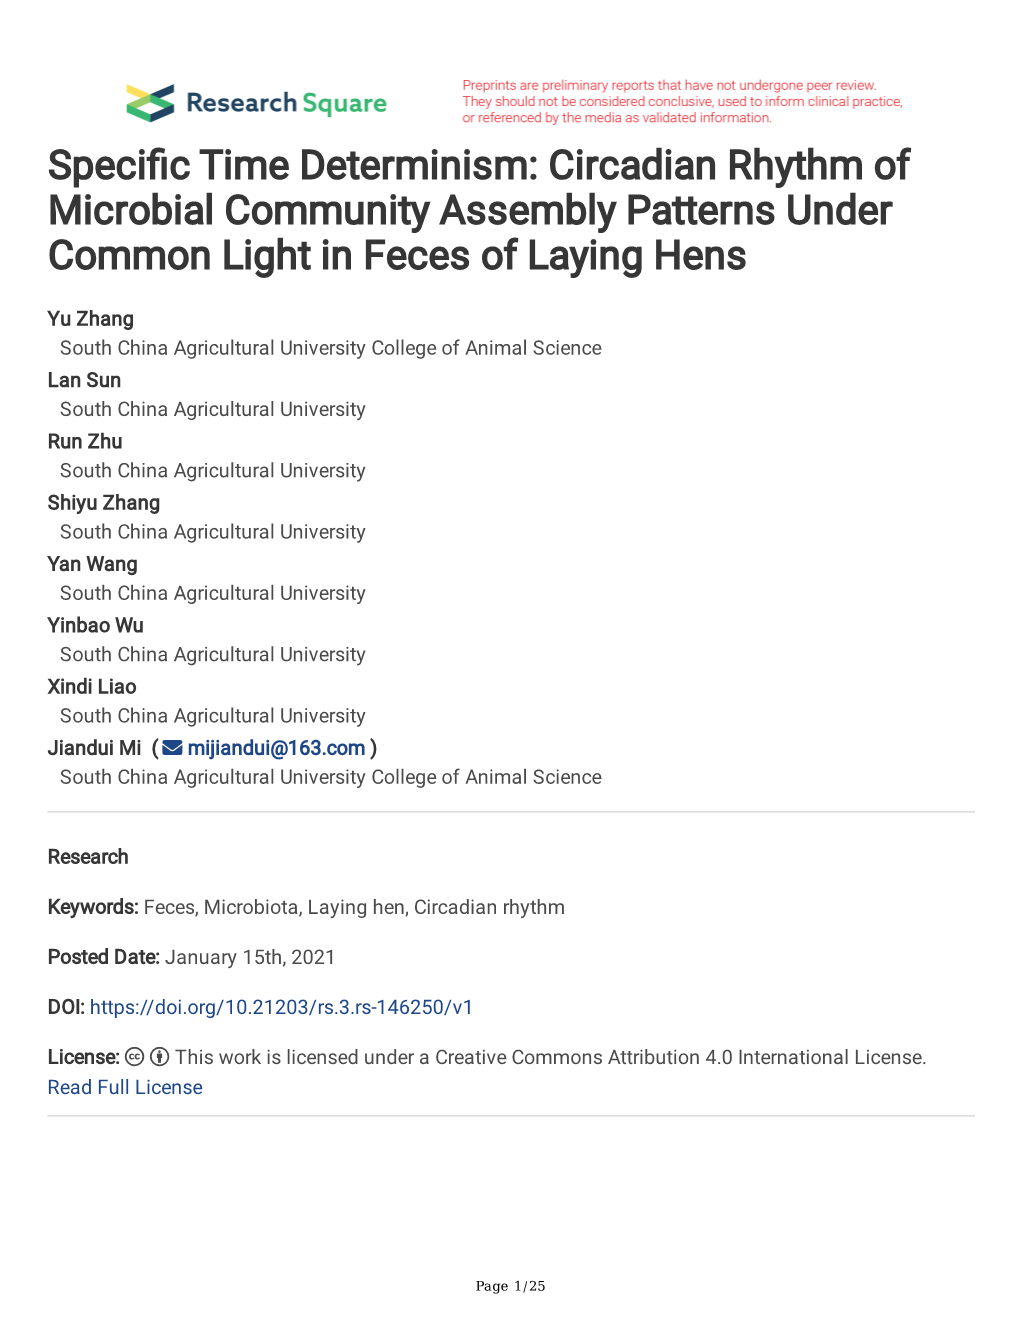 Circadian Rhythm of Microbial Community Assembly Patterns Under Common Light in Feces of Laying Hens